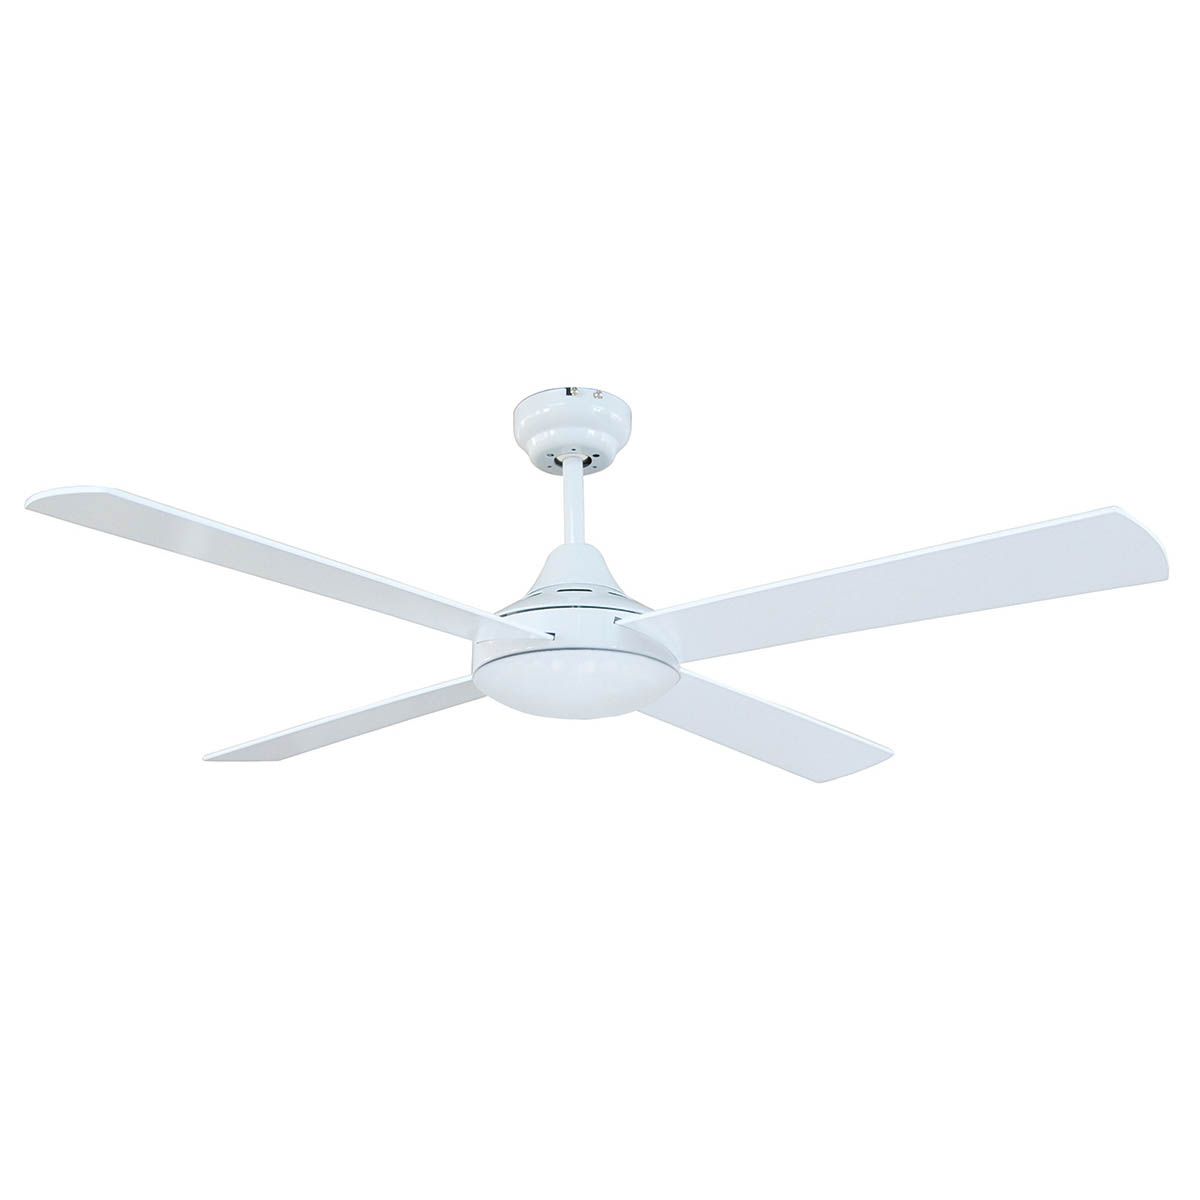 TEMPO 48" CEILING FAN-WHITE WITH WHITE BLADES